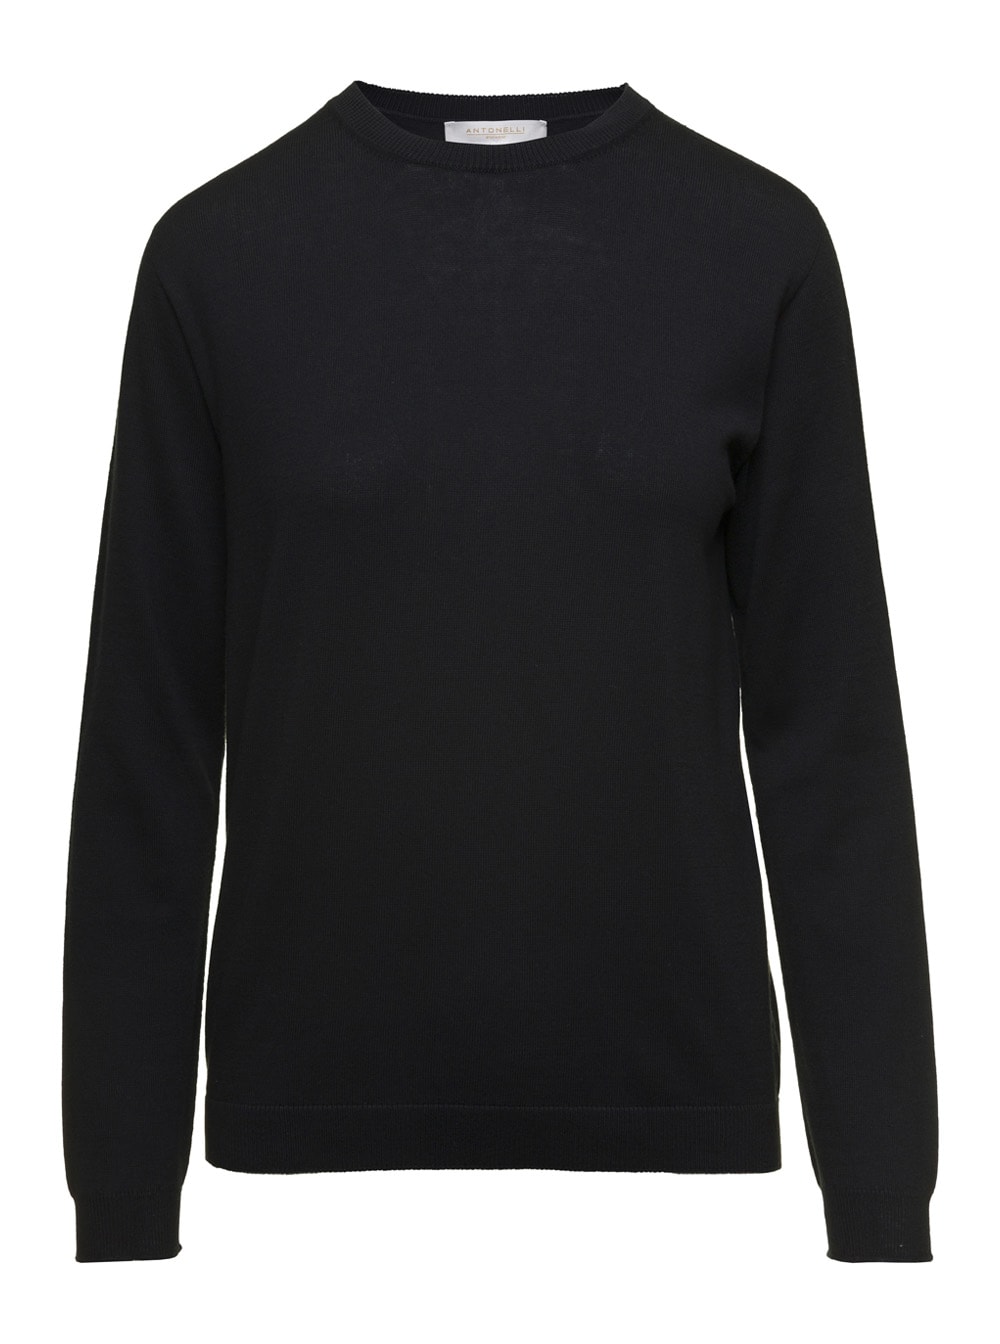 Black Crew Neck Sweater In Cashmere Blend Woman